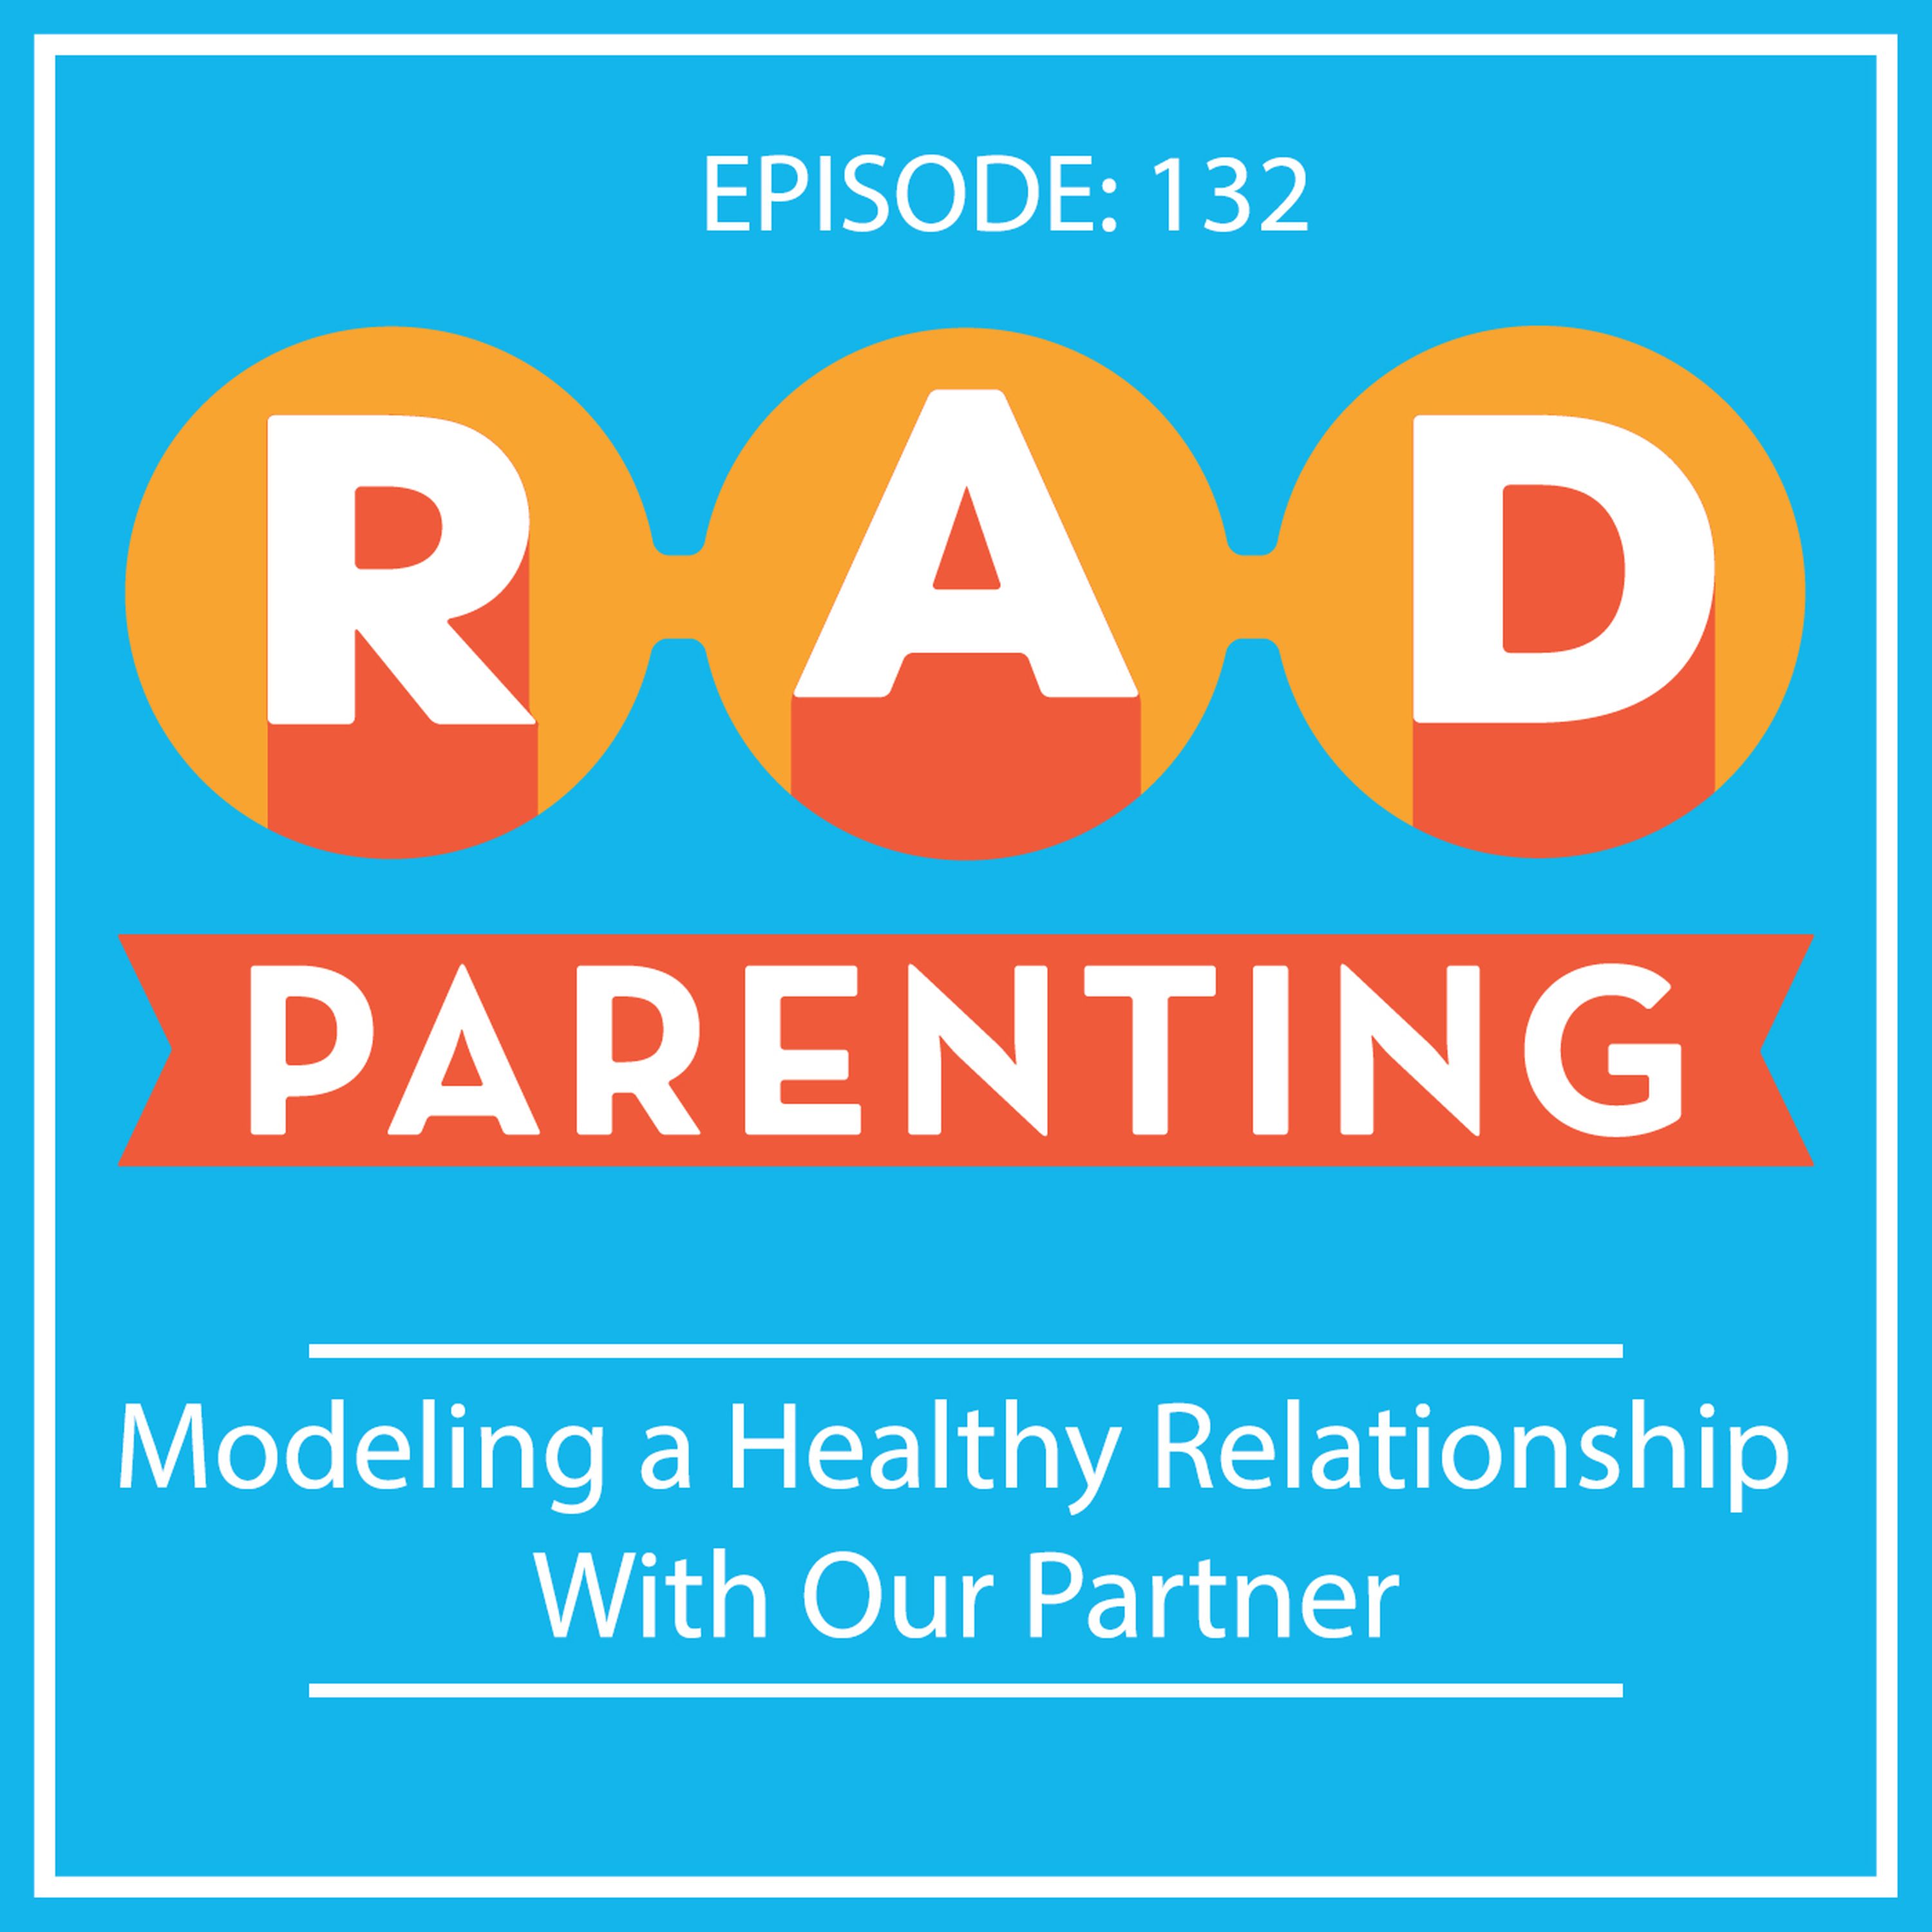 Modeling a Healthy Relationship With Our Partner